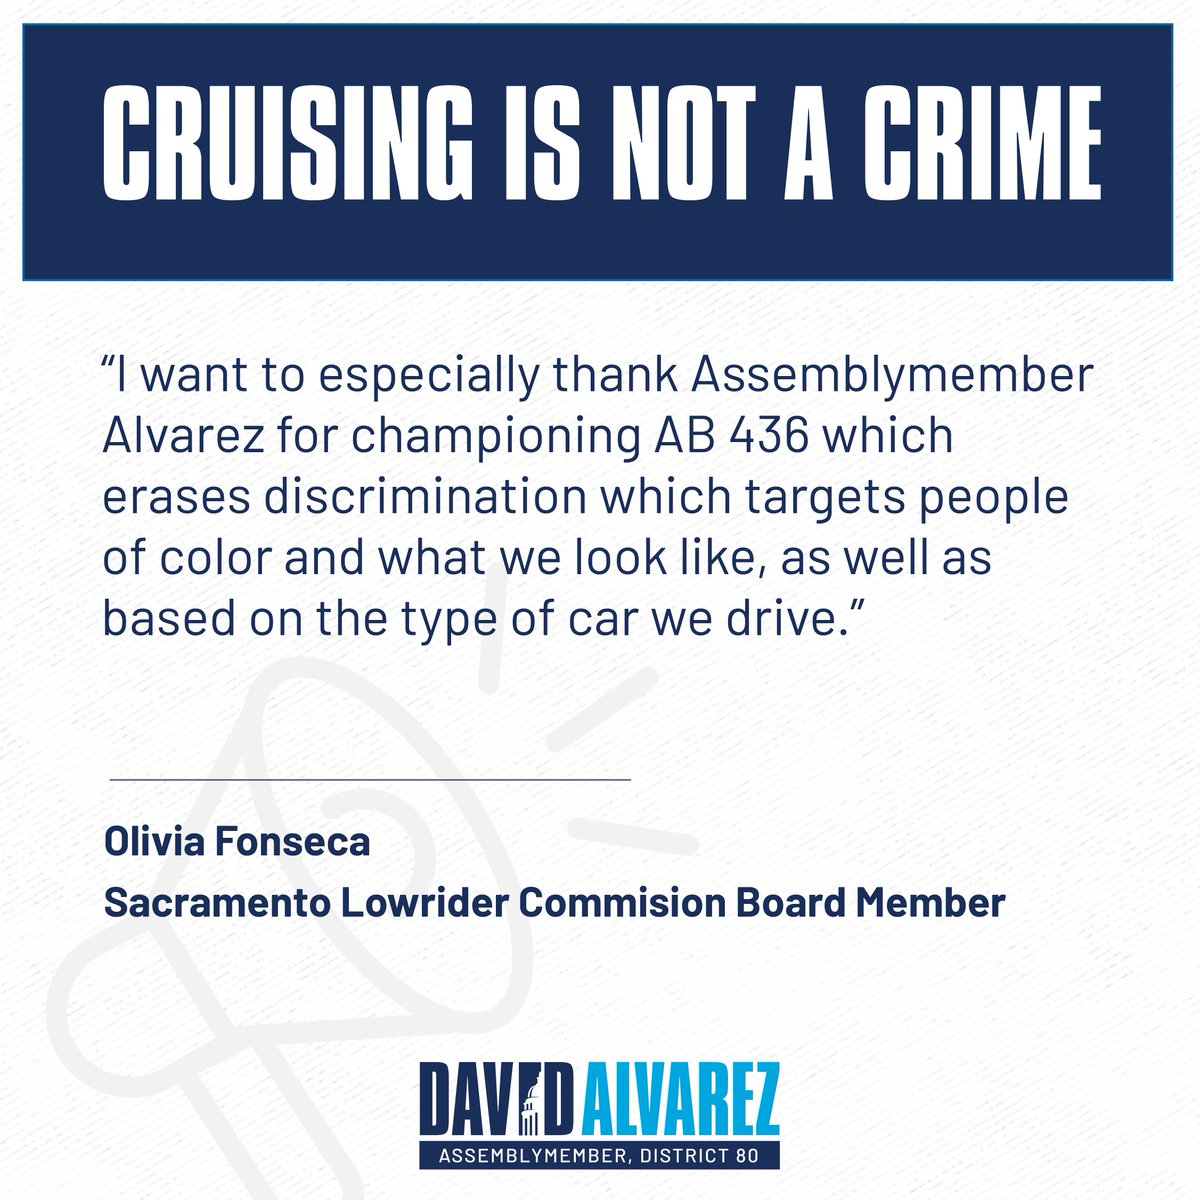 Classic cars and cruising is an expression of art and a cultural identity for many of us. Safe cruising events with lowriders and classic cars can be a fun and festive opportunity for families in our communities! 

We must continue to support #CruisingIsNotACrime